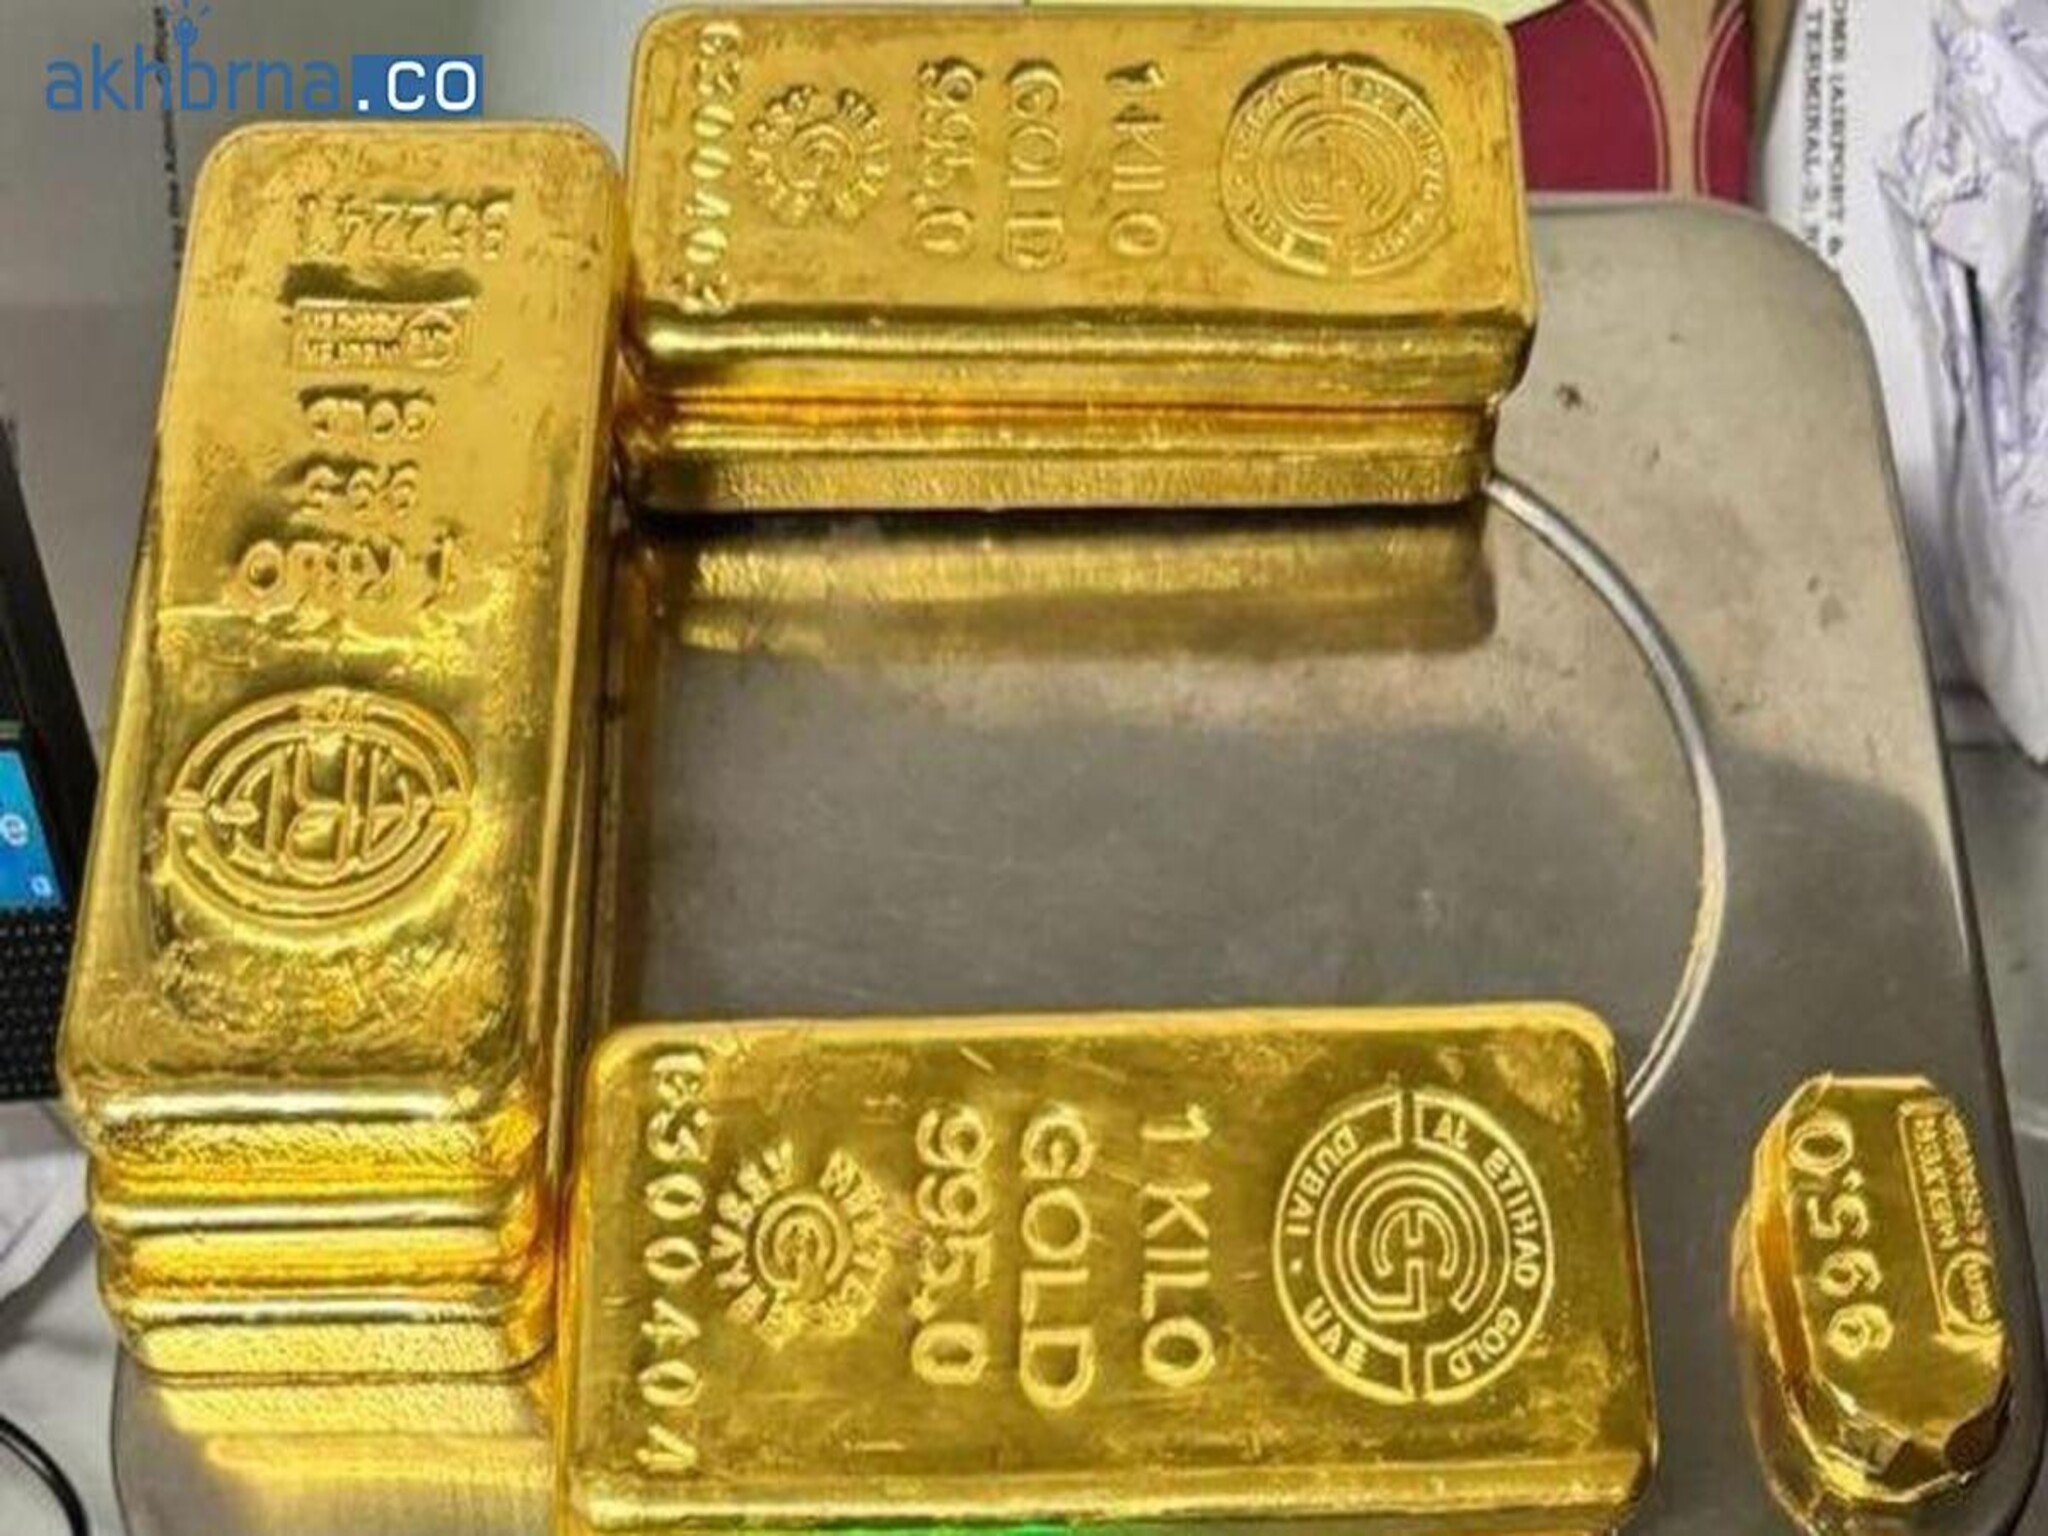 Indian Customs arrest passenger for smuggling gold worth Dh1.9 million from oman